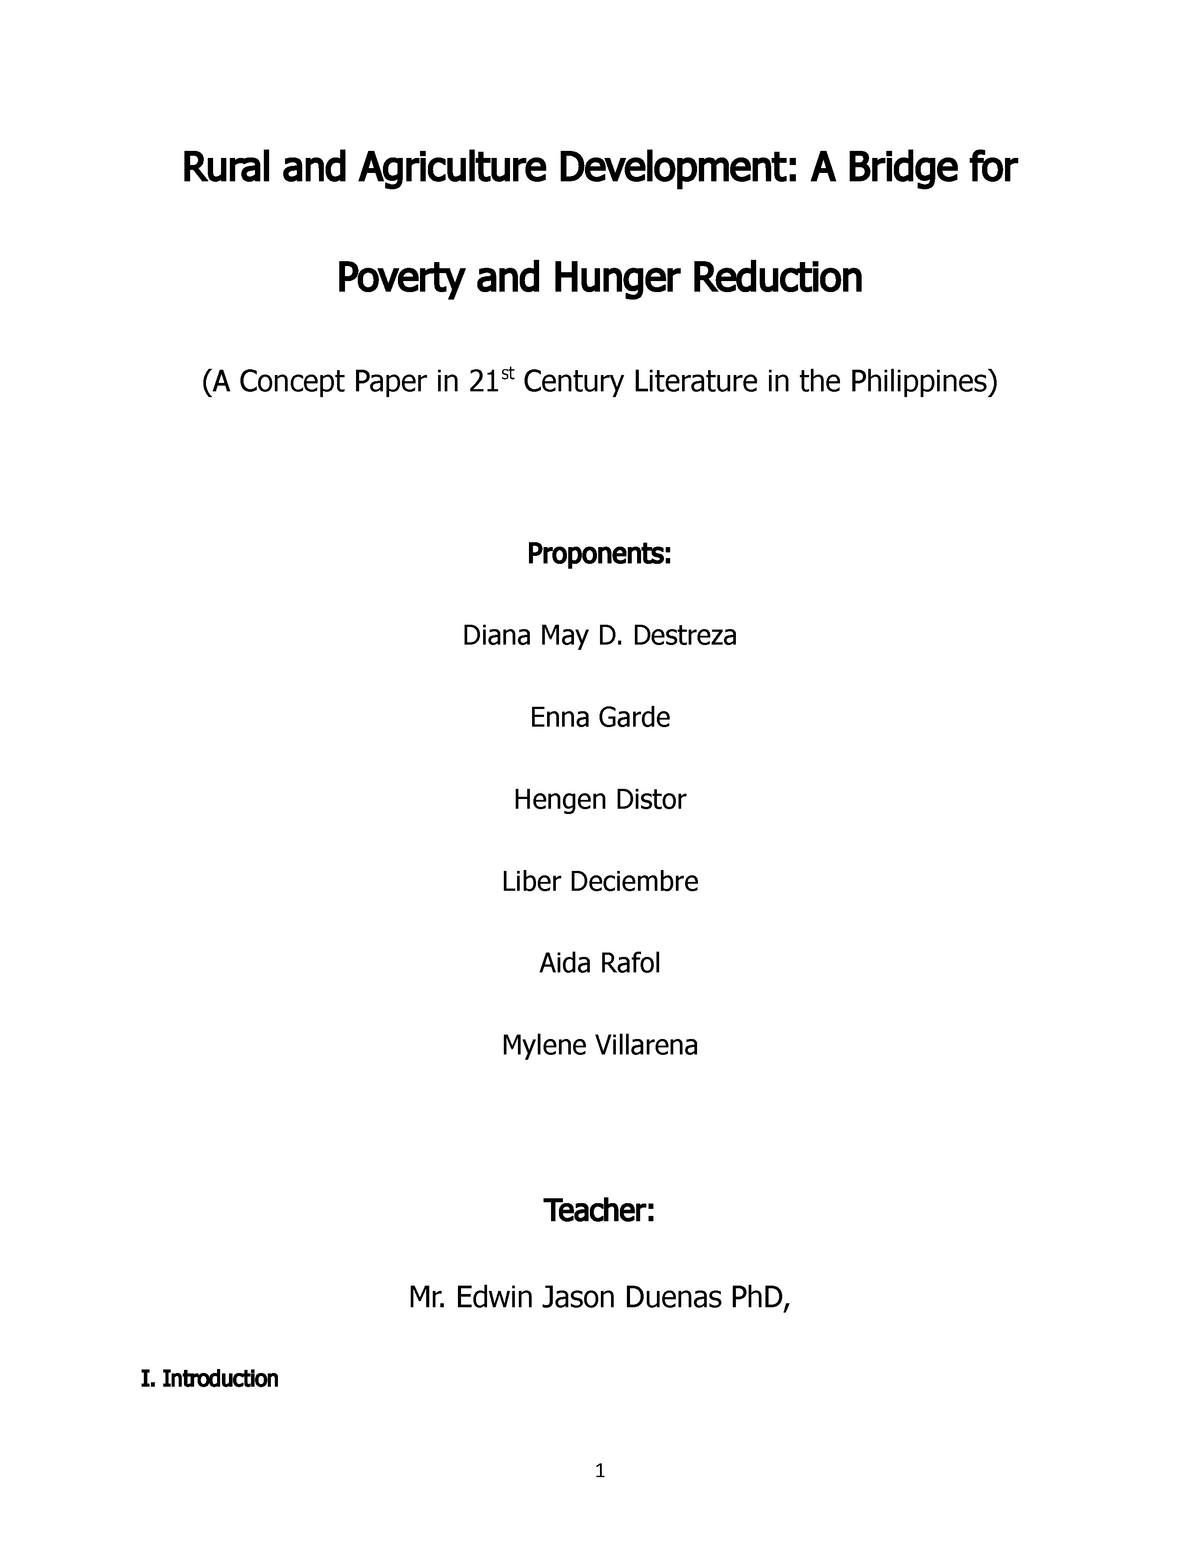 poverty reduction research paper